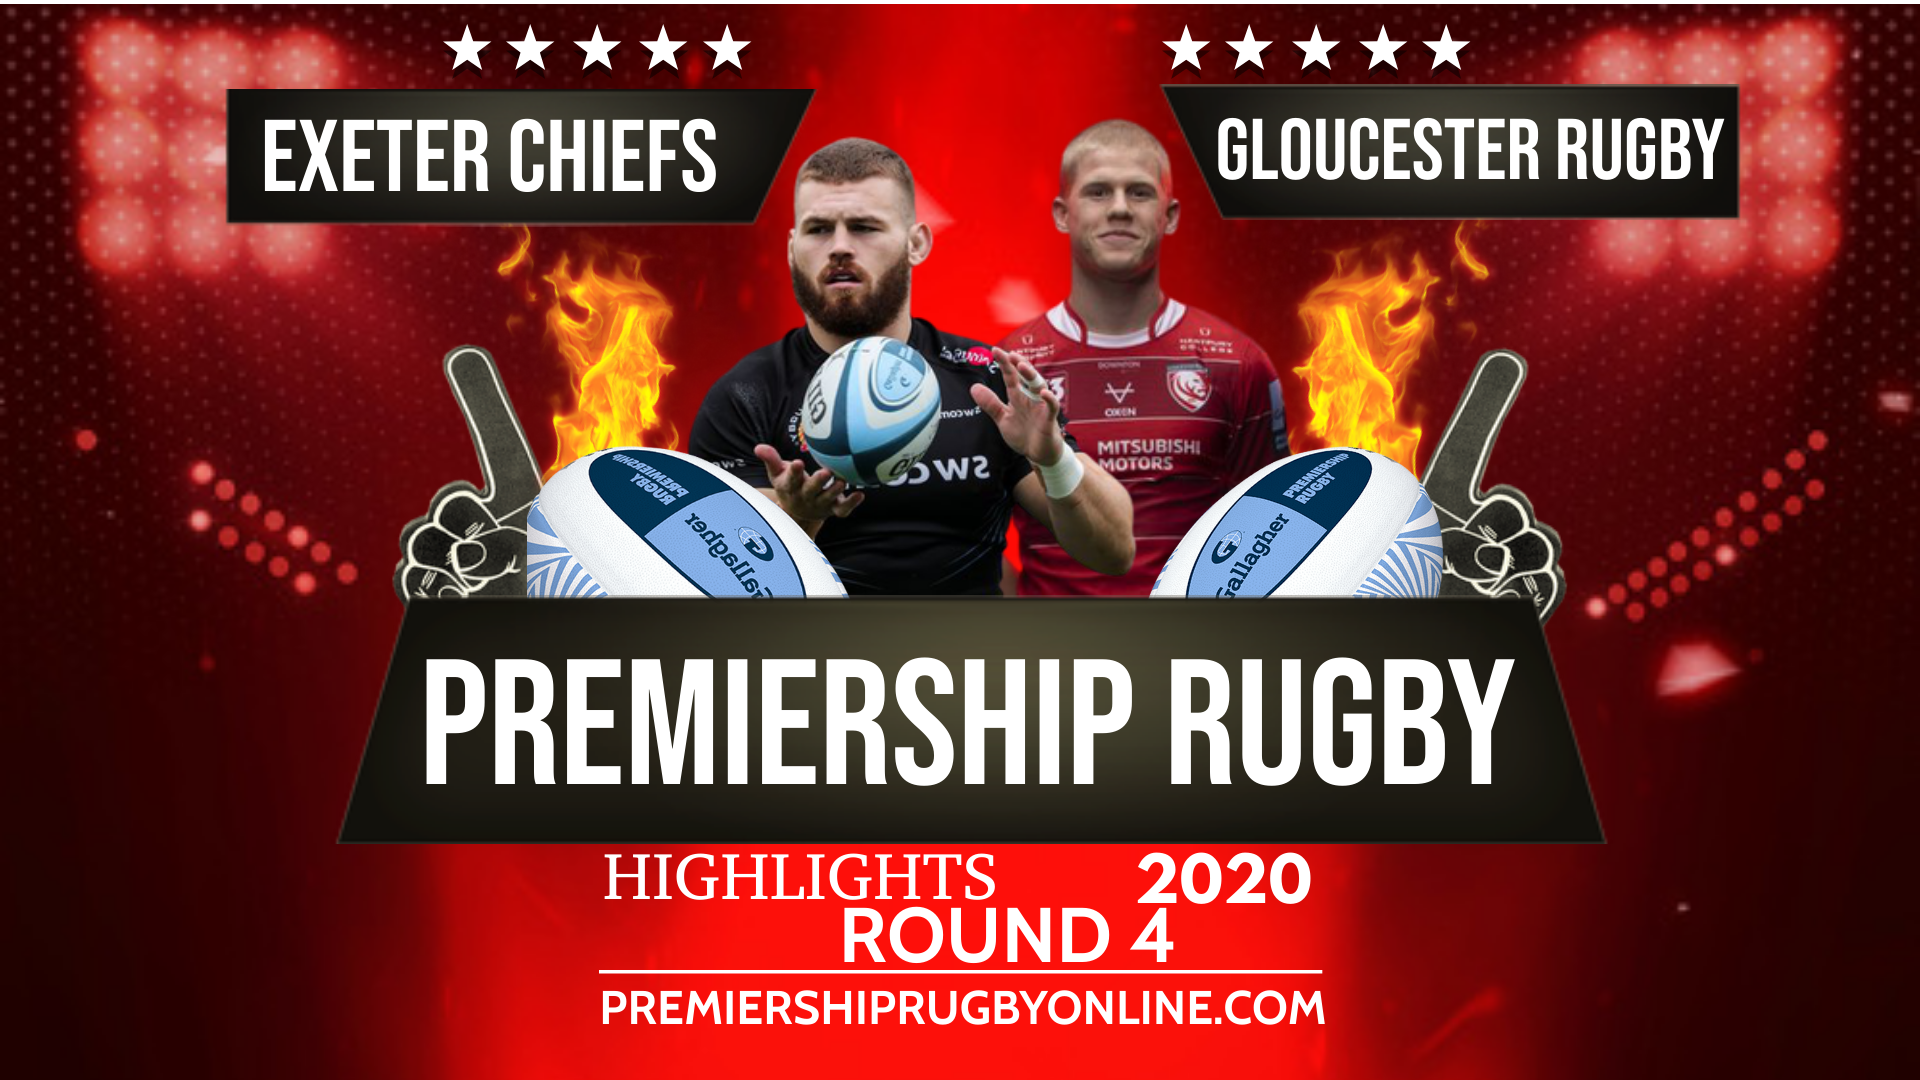 Exeter Chiefs Vs Gloucester Rugby Highlights 2020 RD 4